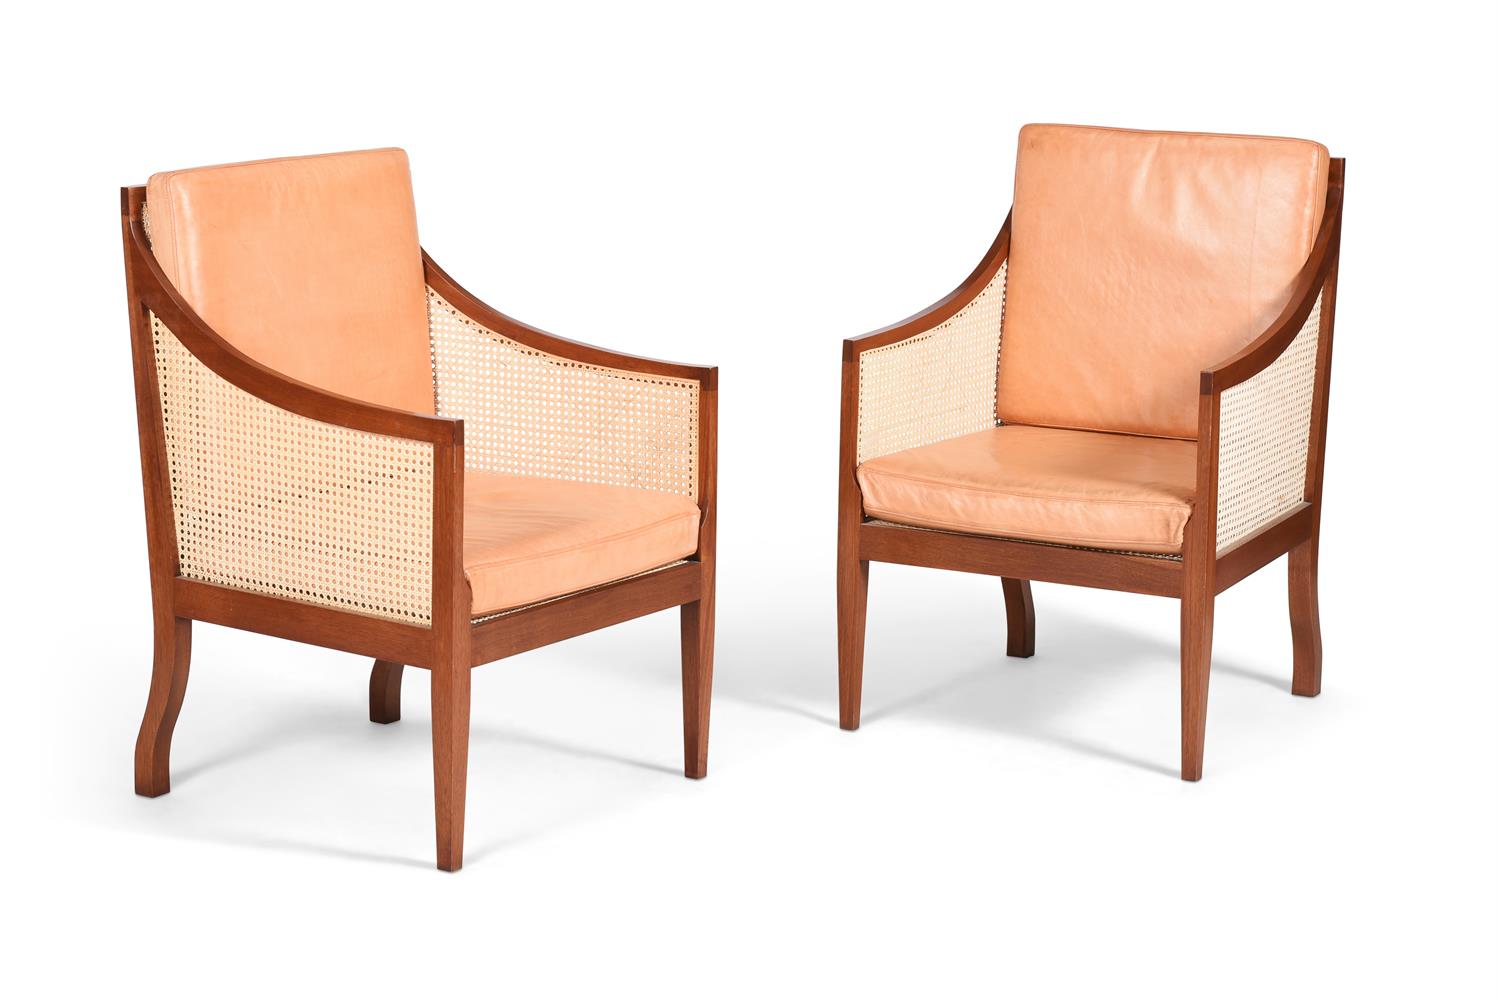 A PAIR OF MAHOGANY BERGERE ARMCHAIRS, IN REGENCY STYLE, OF RECENT MANUFACTURE